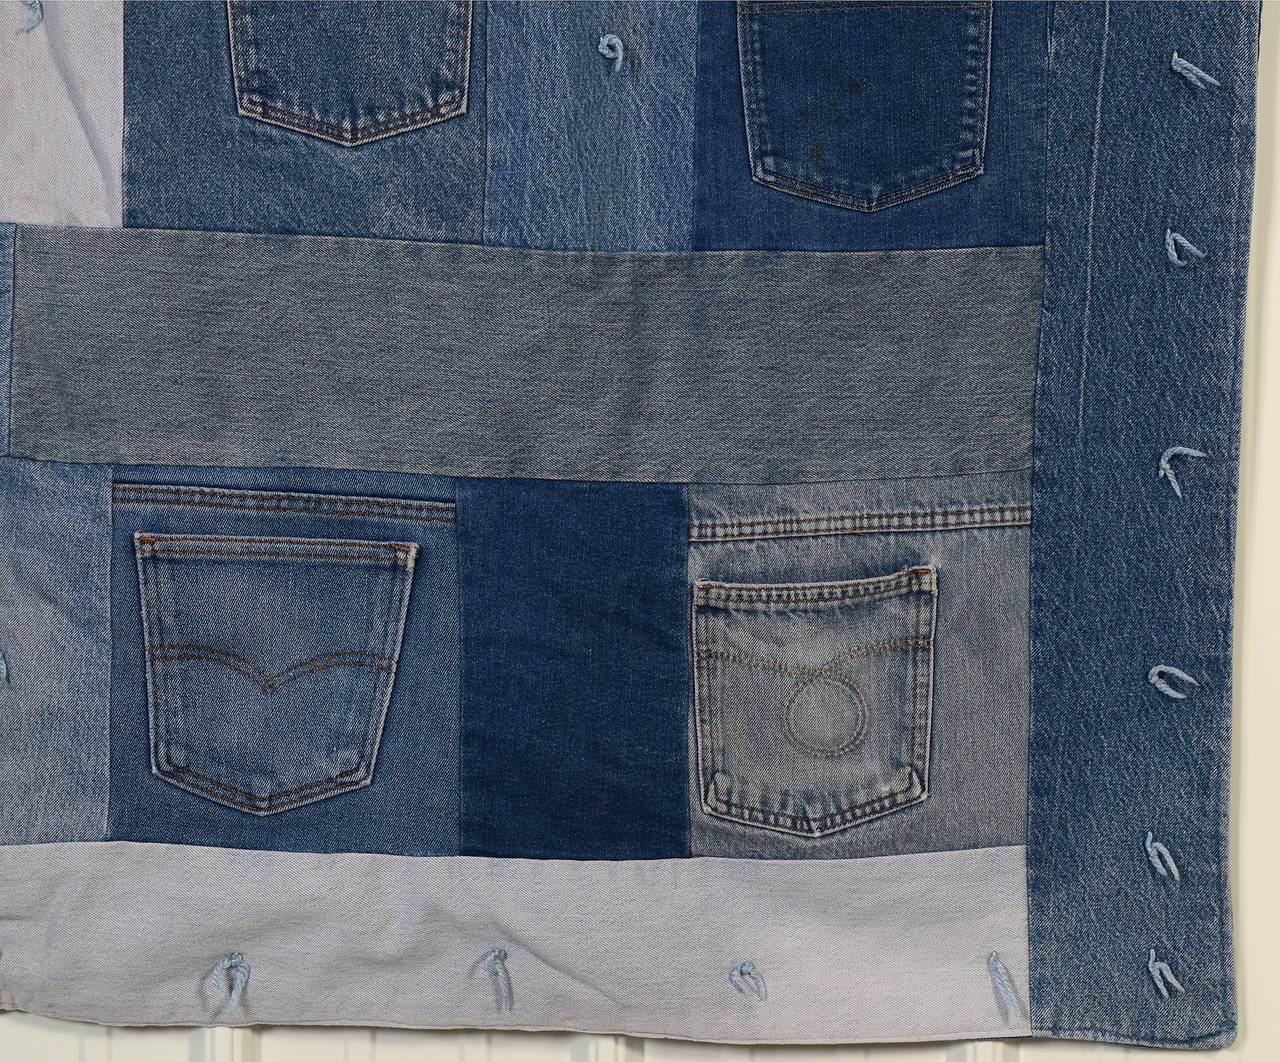 Denim-Quilt-with-Jeans-Pockets-Circa-1980-1307663-3